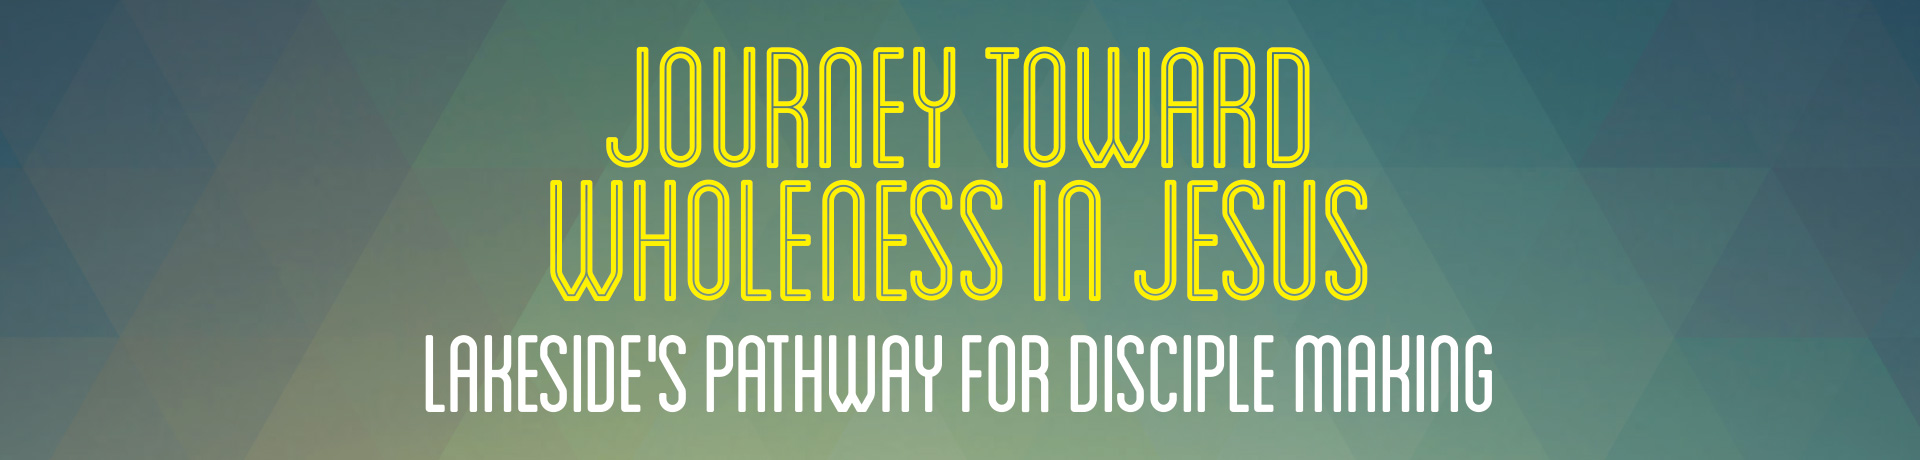 JOURNEY TOWARD WHOLENESS IN JESUS LAKESIDE' S PATHWAY FOR DISCIPLE MAKING